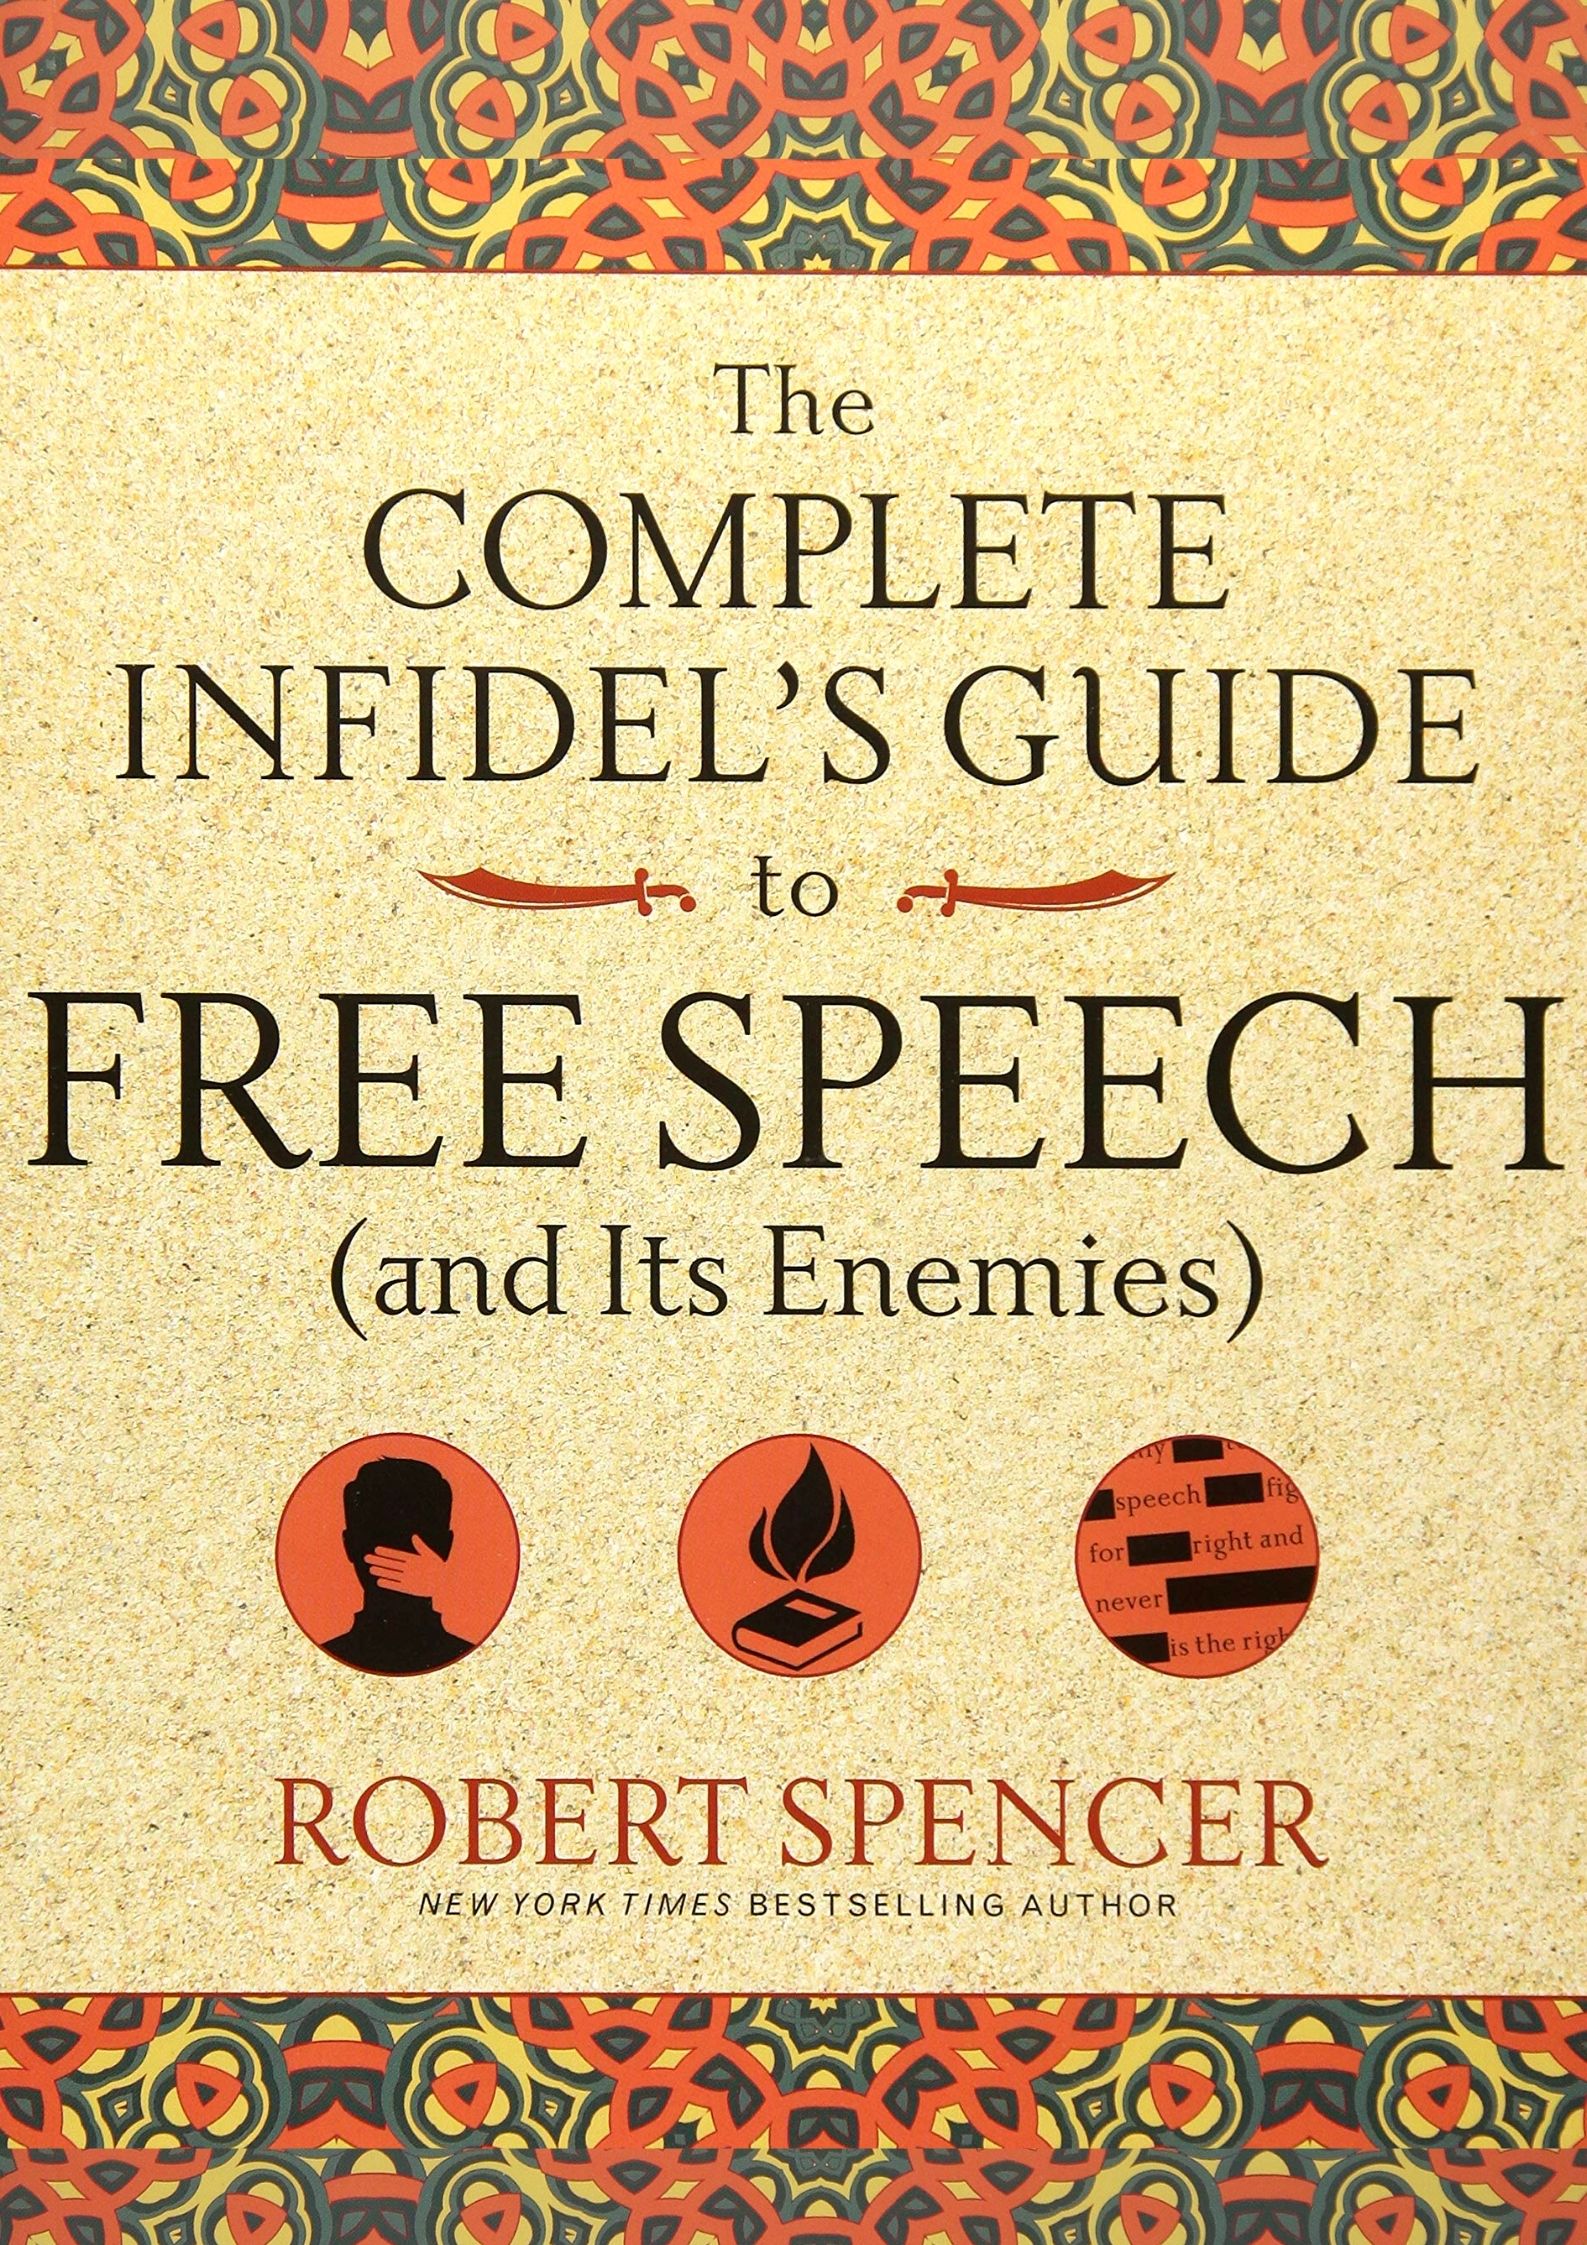 The complete Infidel's guide to Free speech (and its Enemies)